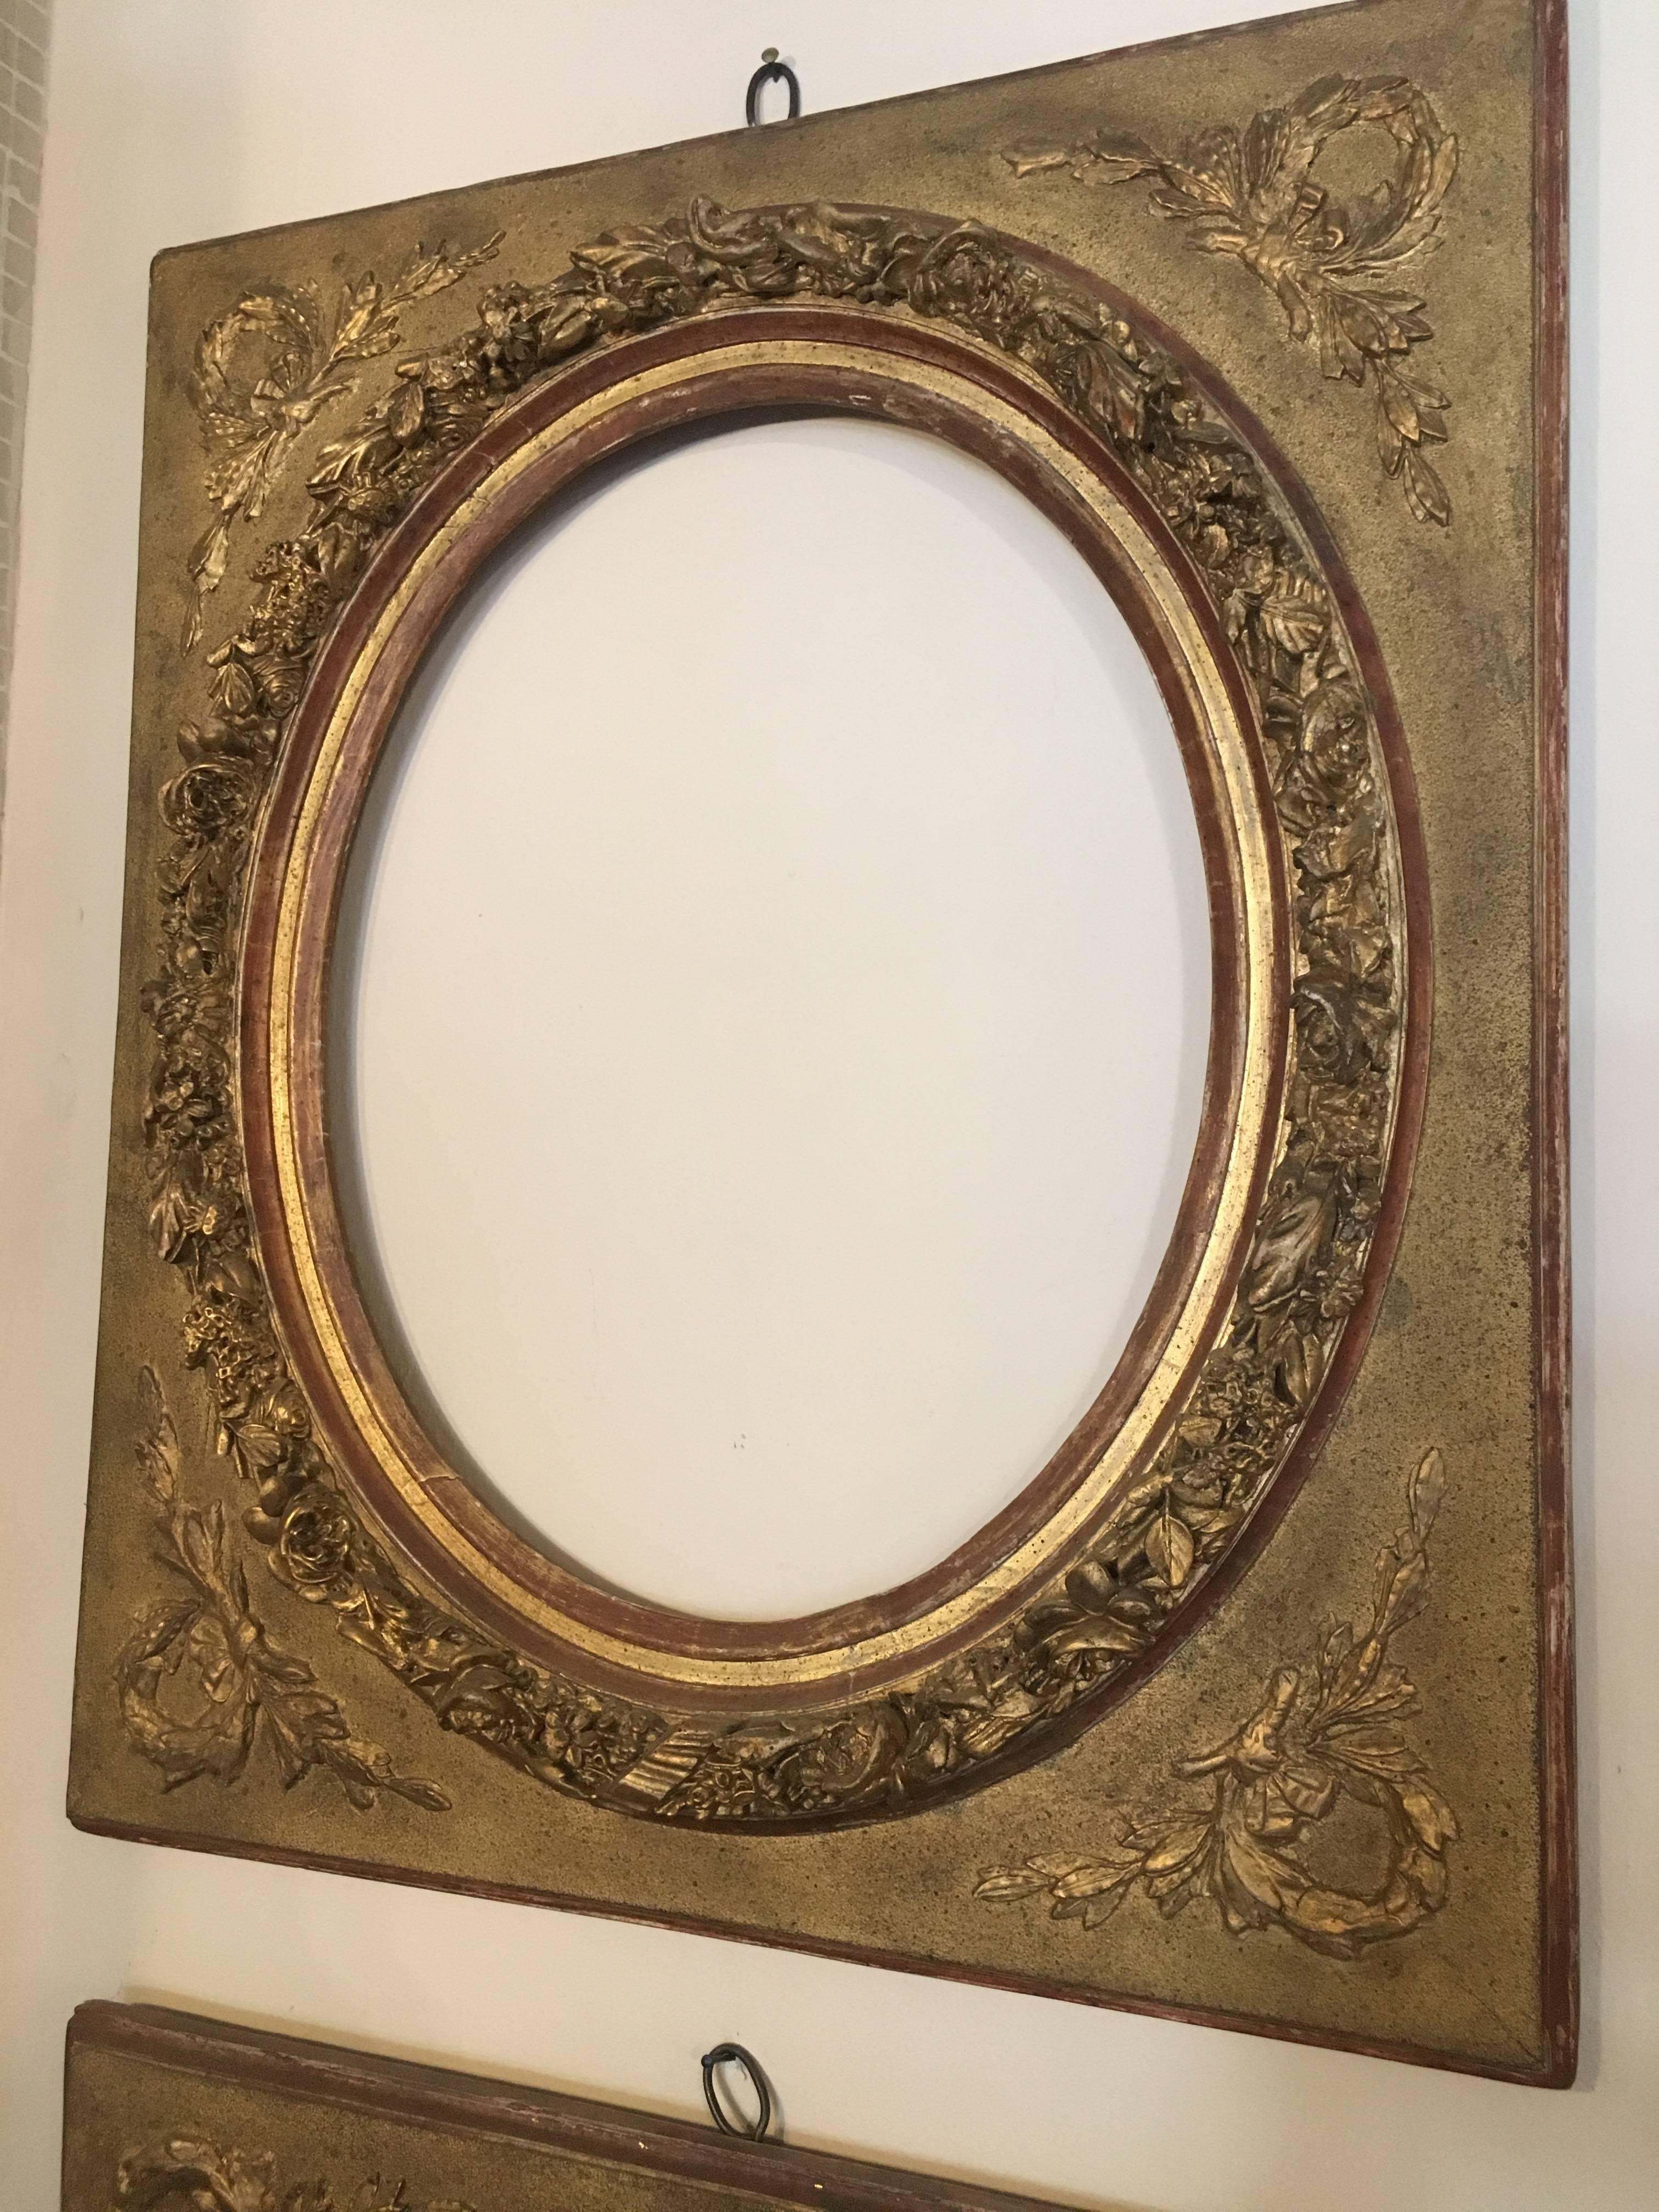 19th Century Pair of French Picture Frames in Giltwood from 1880s Decorated with Flowers